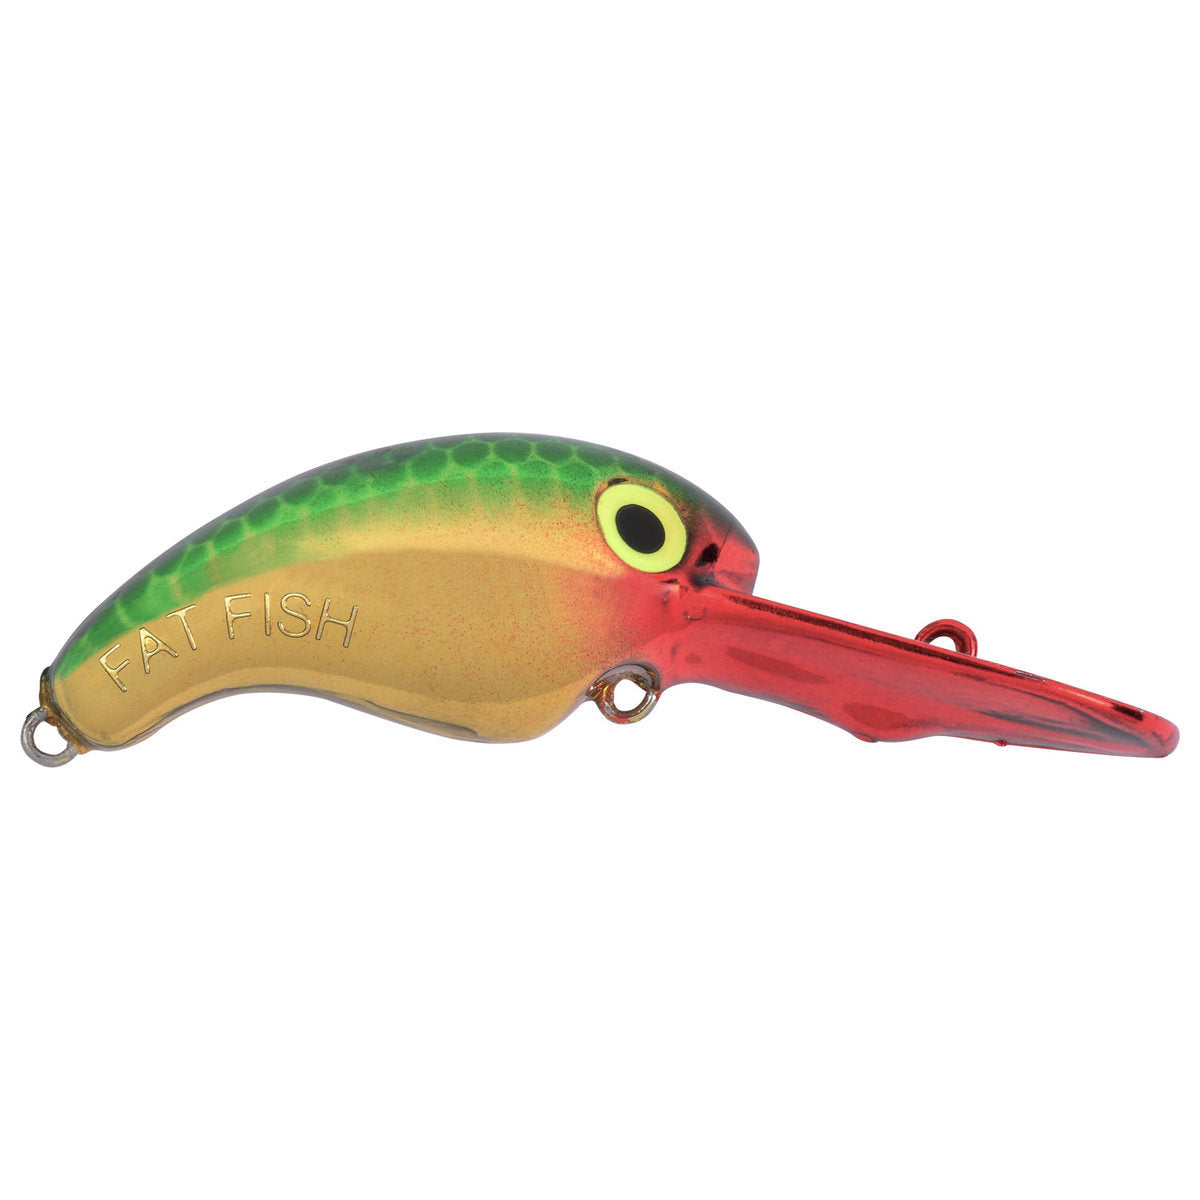 6 Type-R Glidebait Goldenberry Shad – Northwoods Lures